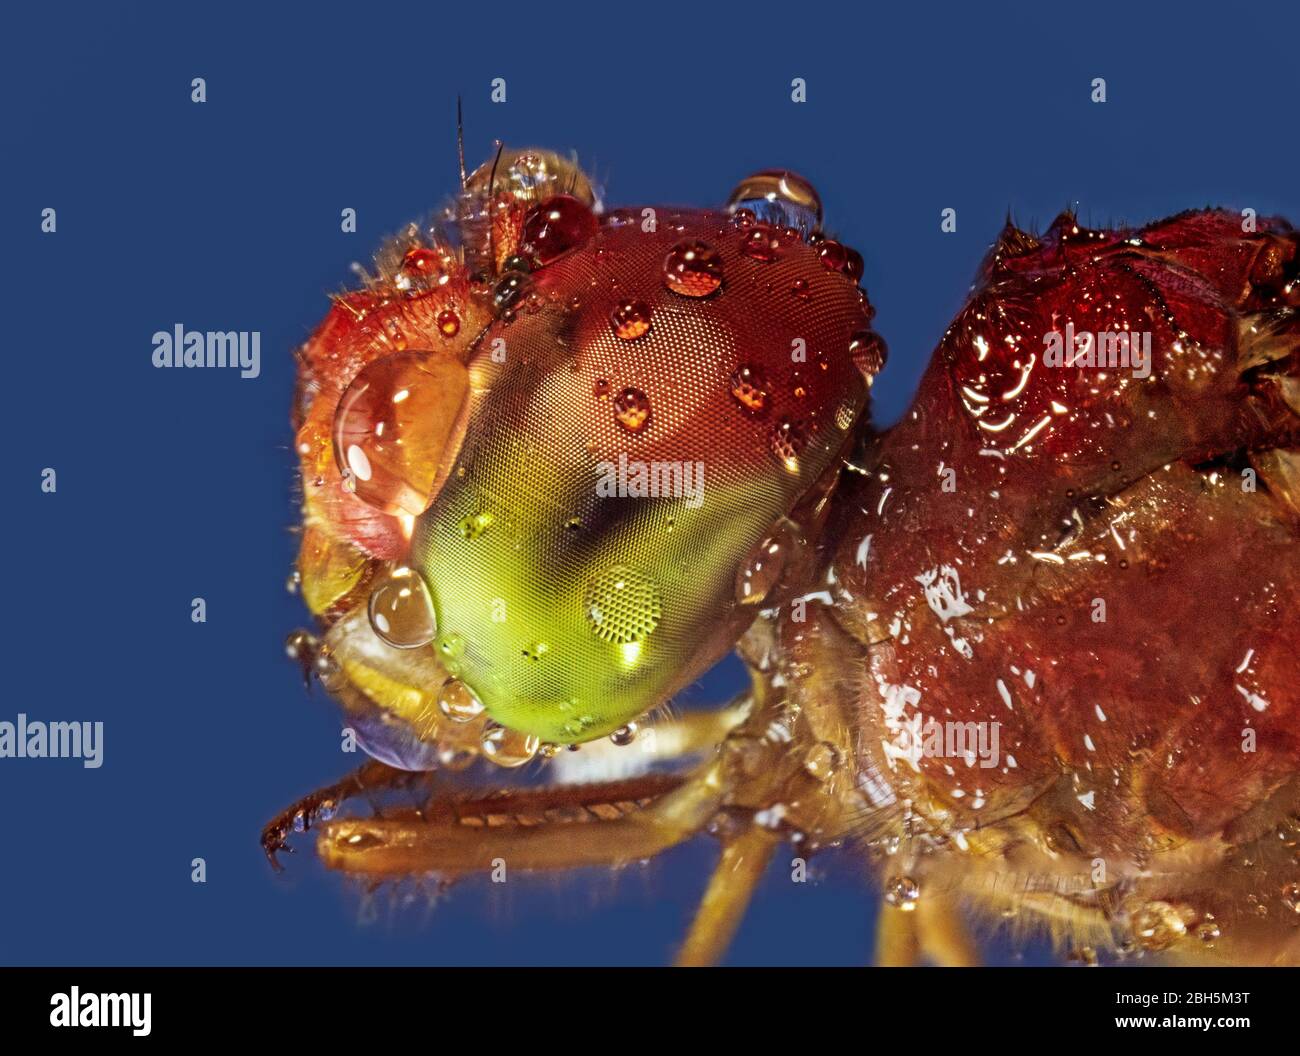 Head of a dragonfly with dew drops Stock Photo